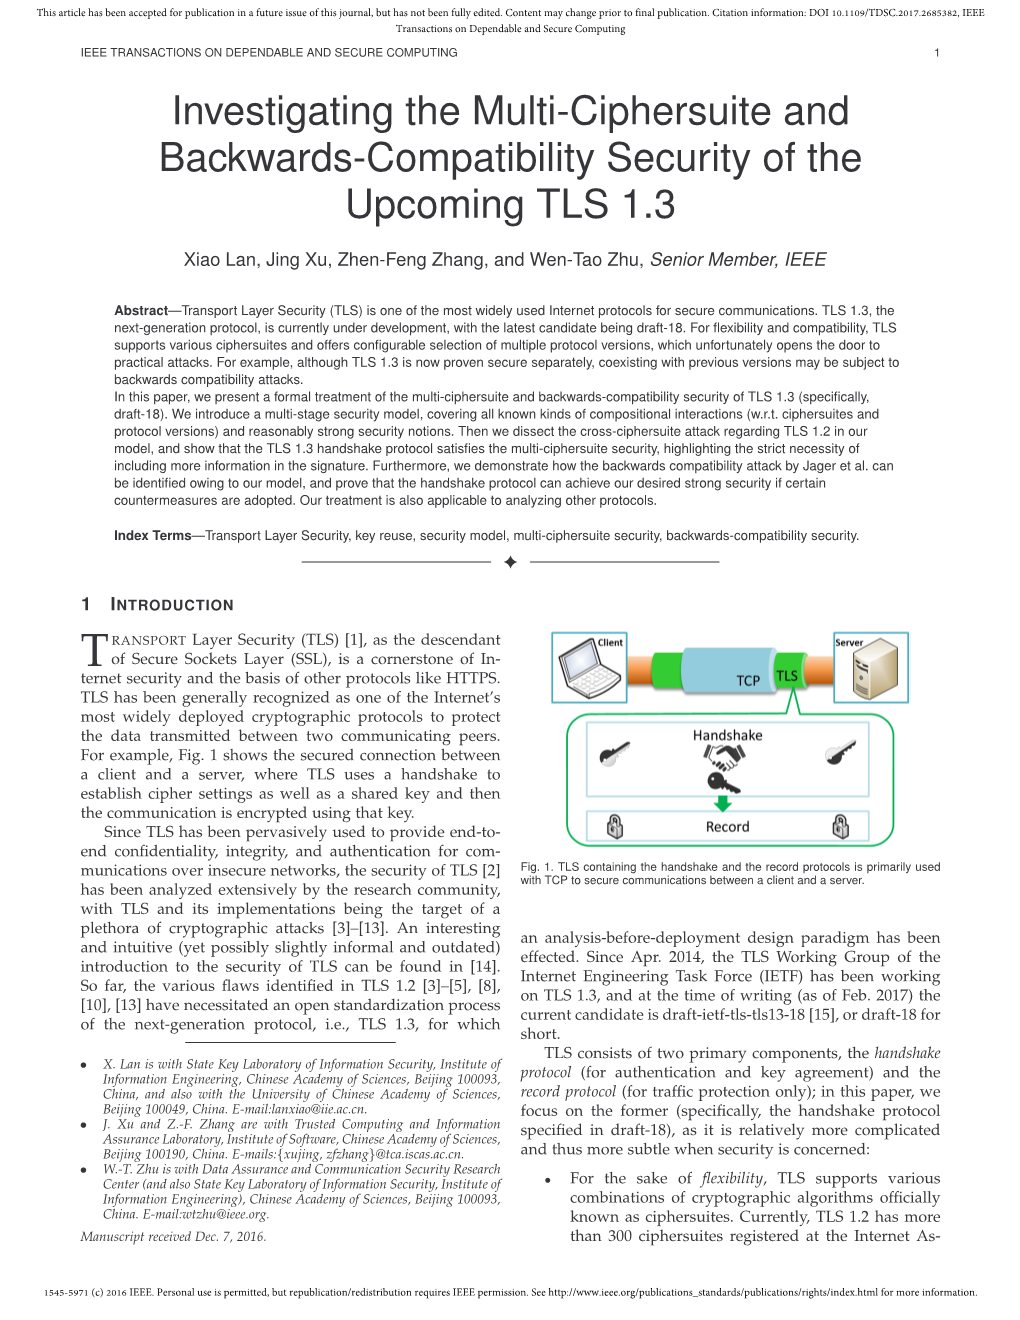 Investigating the Multi-Ciphersuite and Backwards-Compatibility Security of the Upcoming TLS 1.3